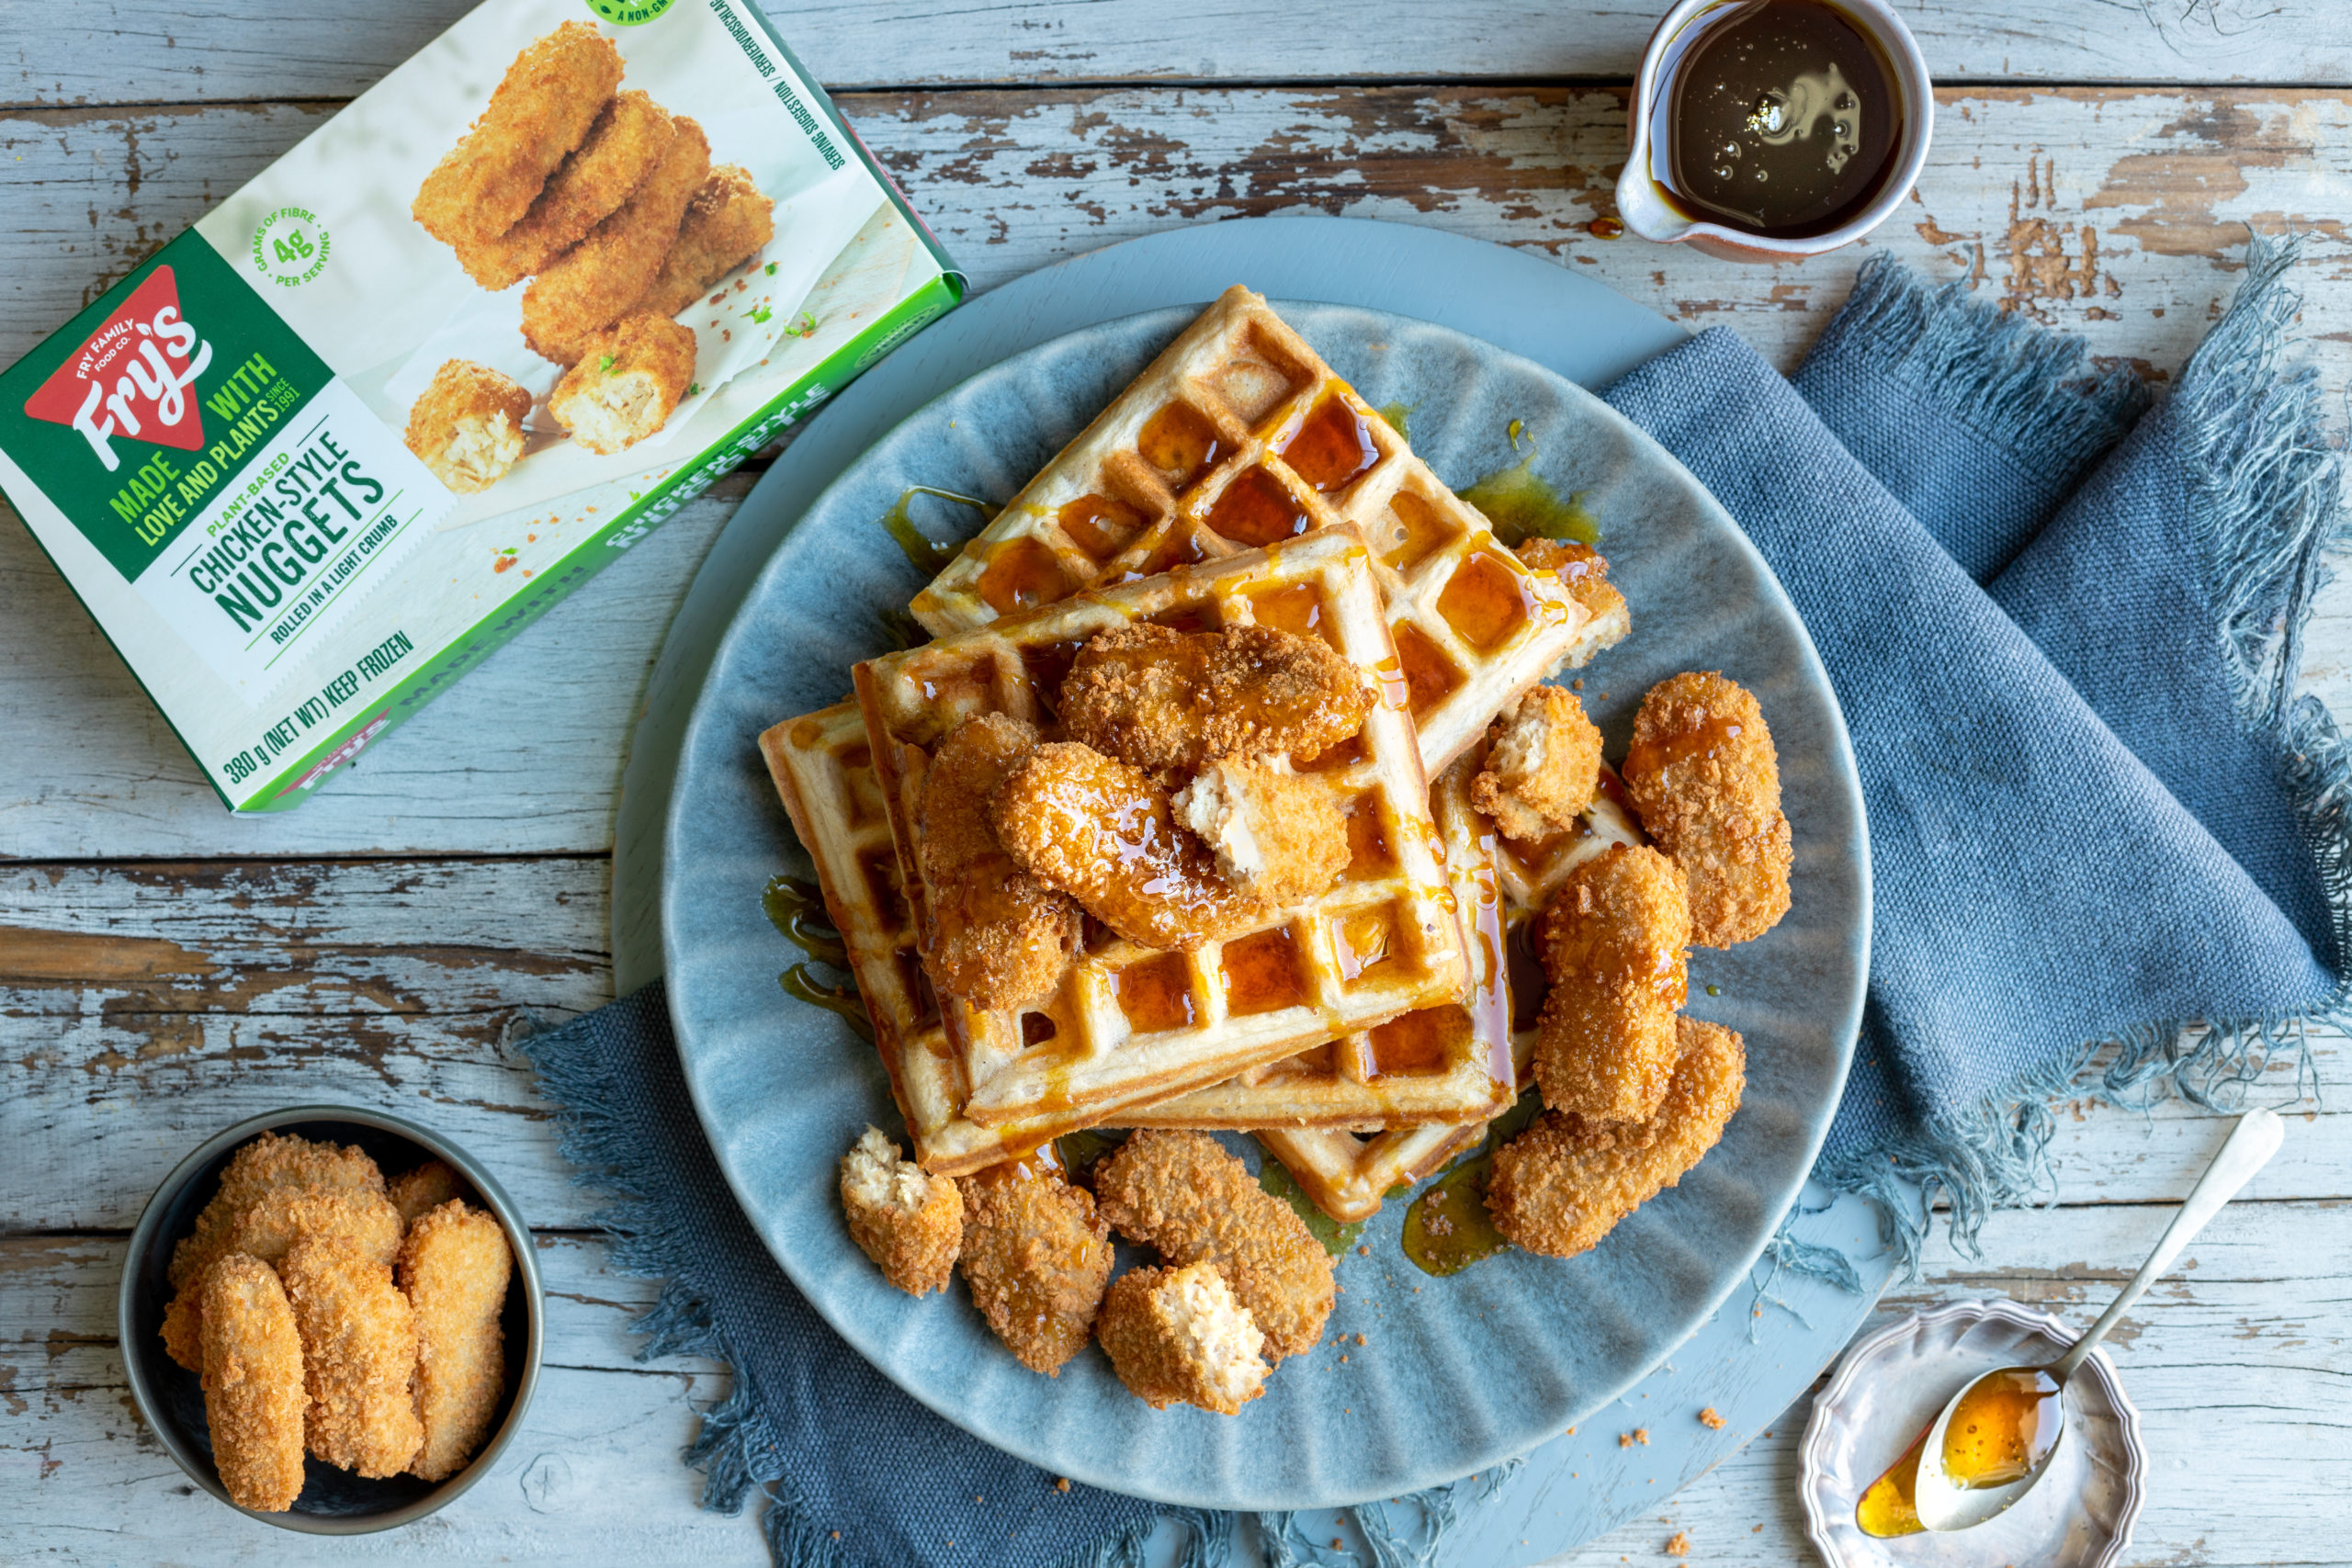 https://fryfamilyfood.com/za/wp-content/uploads/sites/2/2021/04/14_Frys_Chick_style_nuggets_with_waffles_L-scaled.jpg